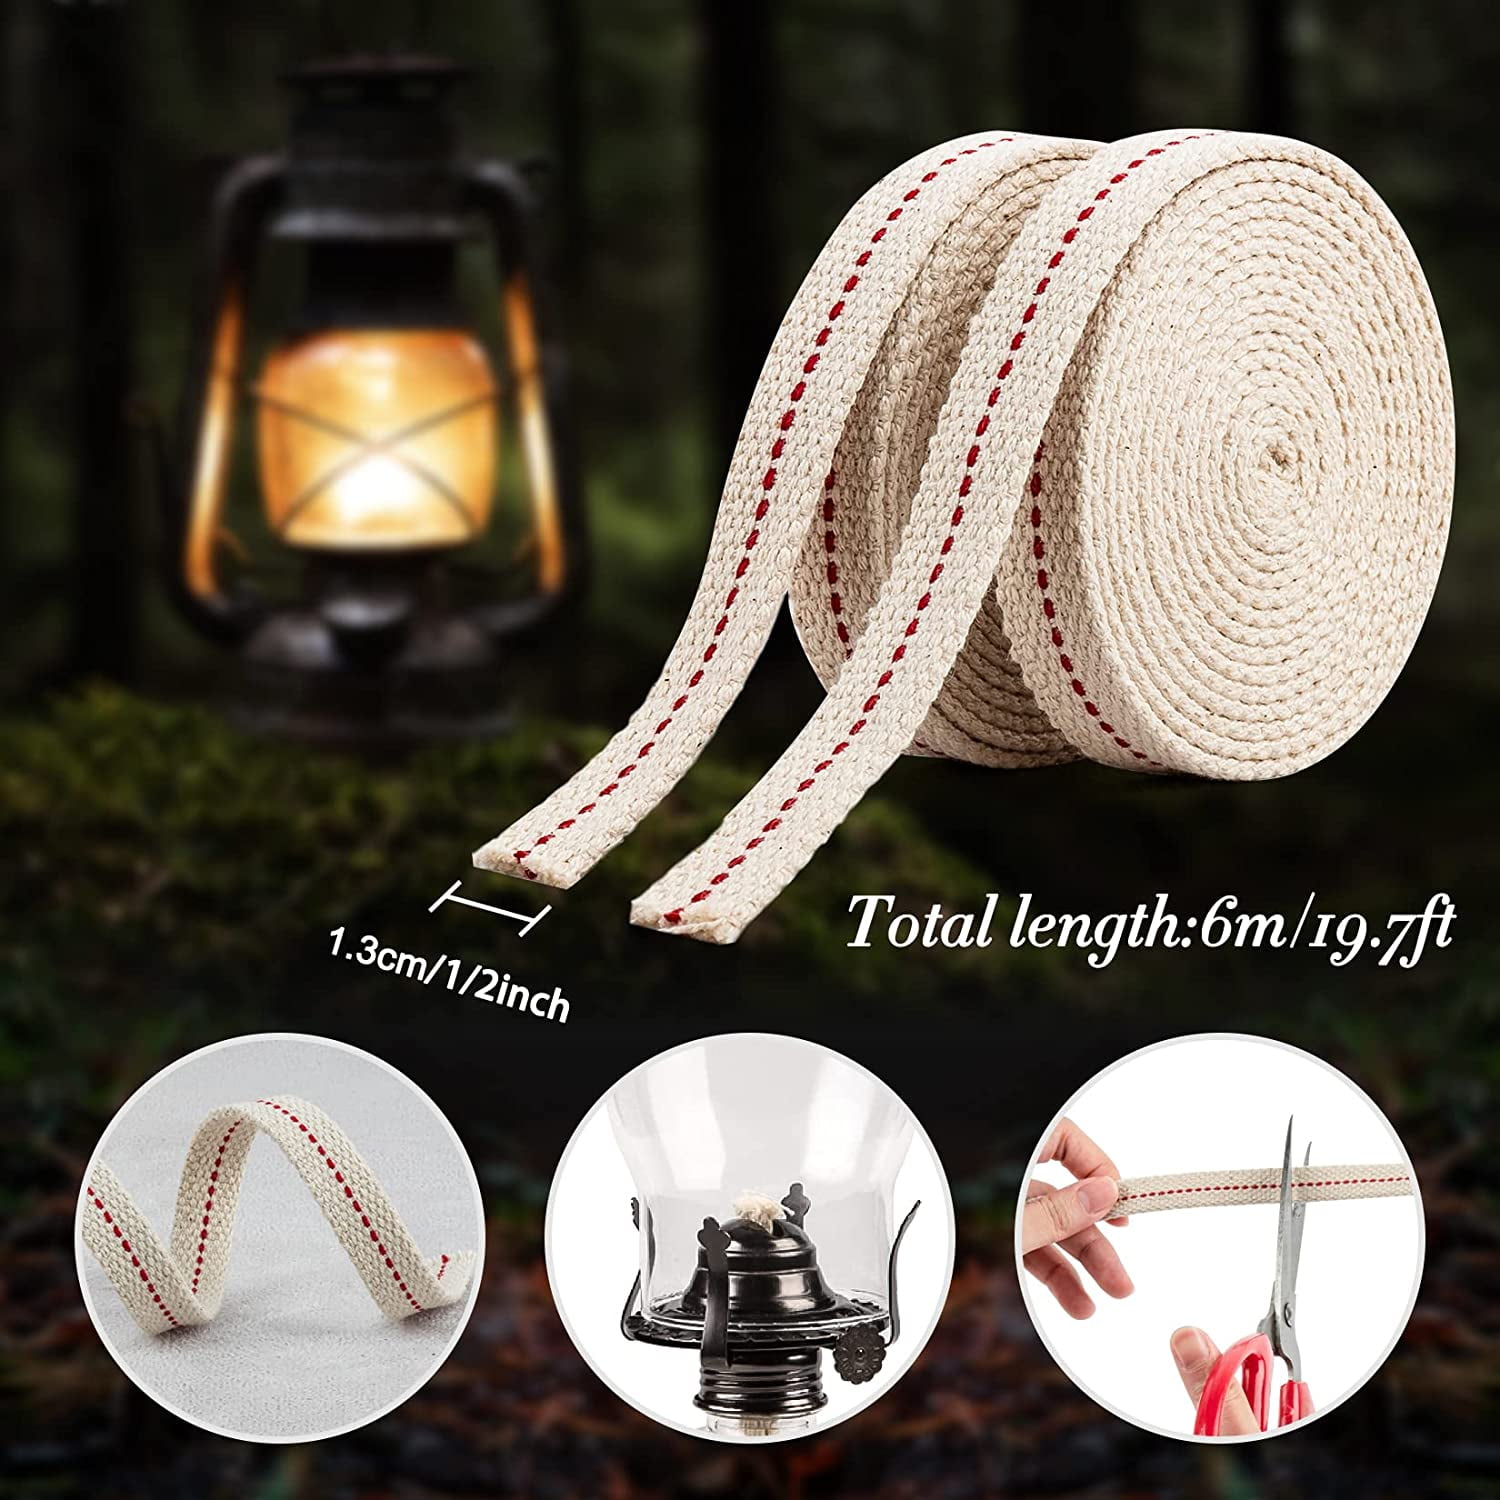  Swatom Oil Lamp Wicks 33 Feet Roll 3/4 inch Oil Wick for Lamps  Cotton Lantern Kerosene Wick Replacement with Genuine Red Stitch : Home &  Kitchen